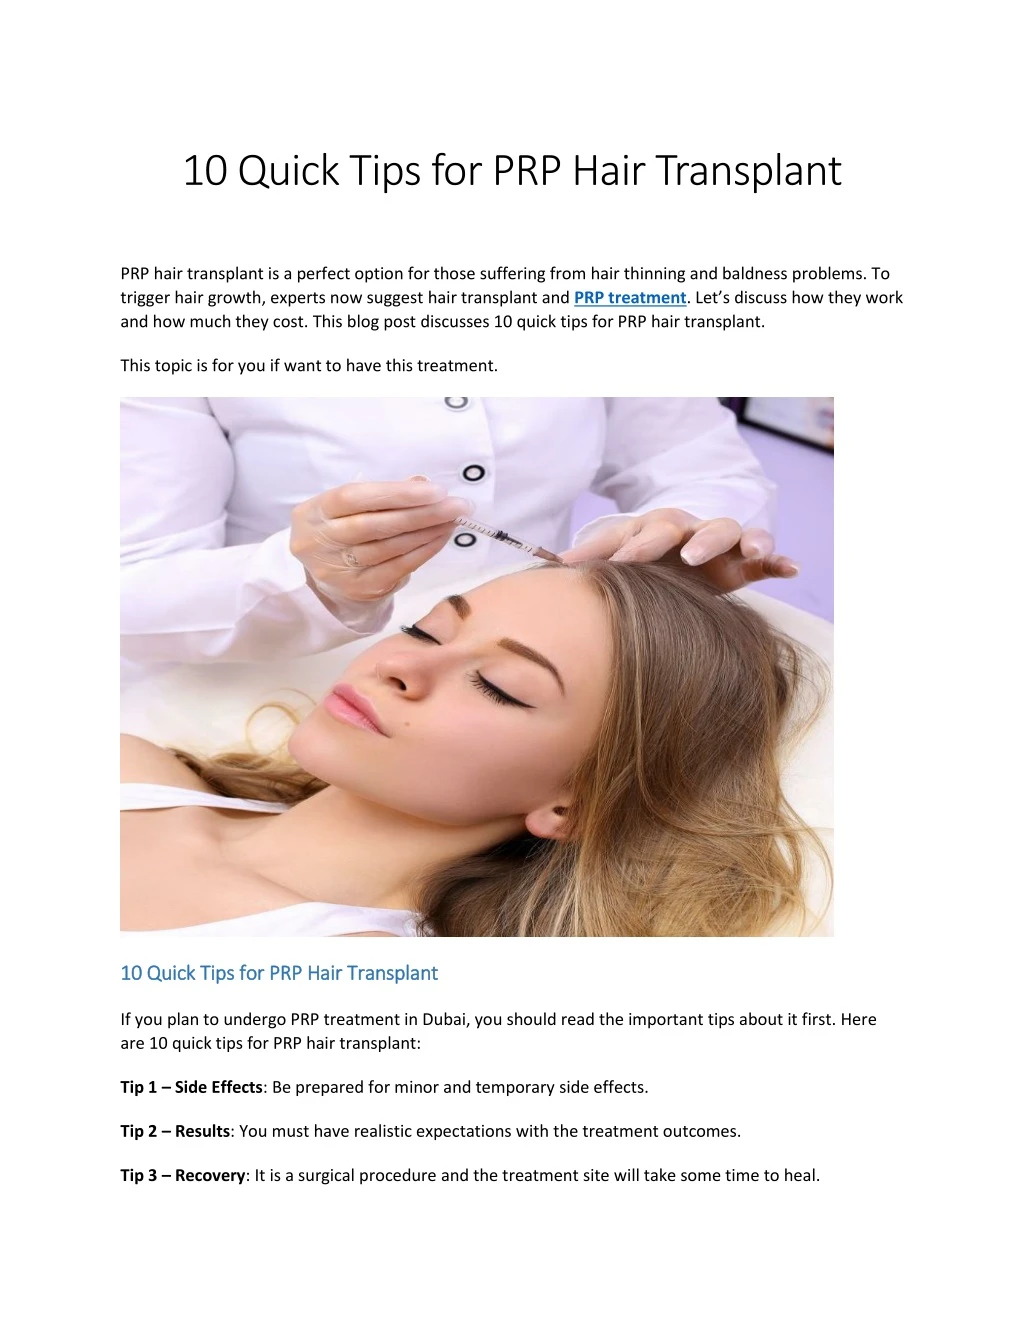 10 quick tips for prp hair transplant